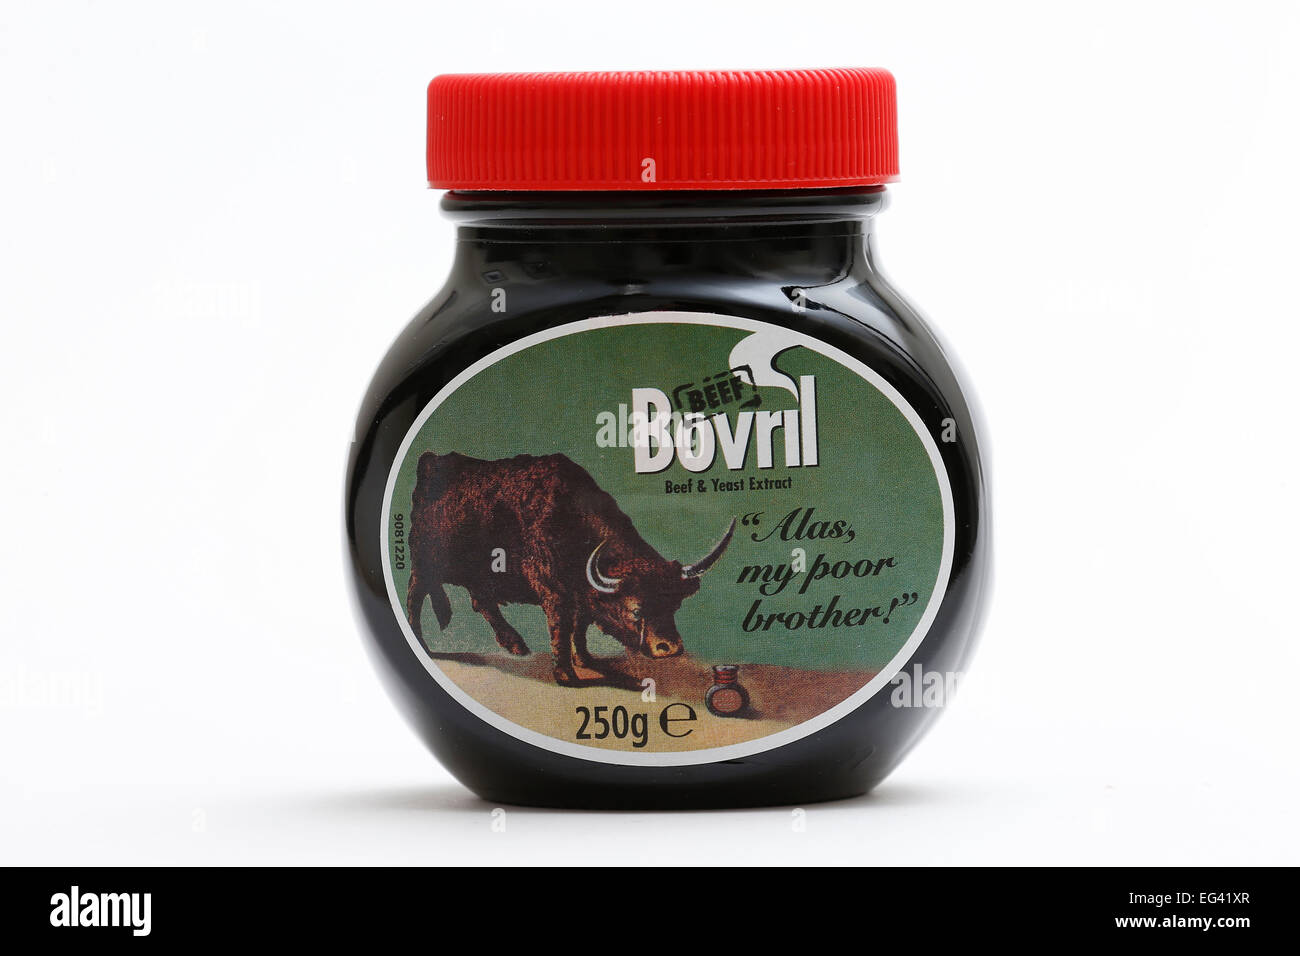 Bovril Beef Extract Spread. Stock Photo